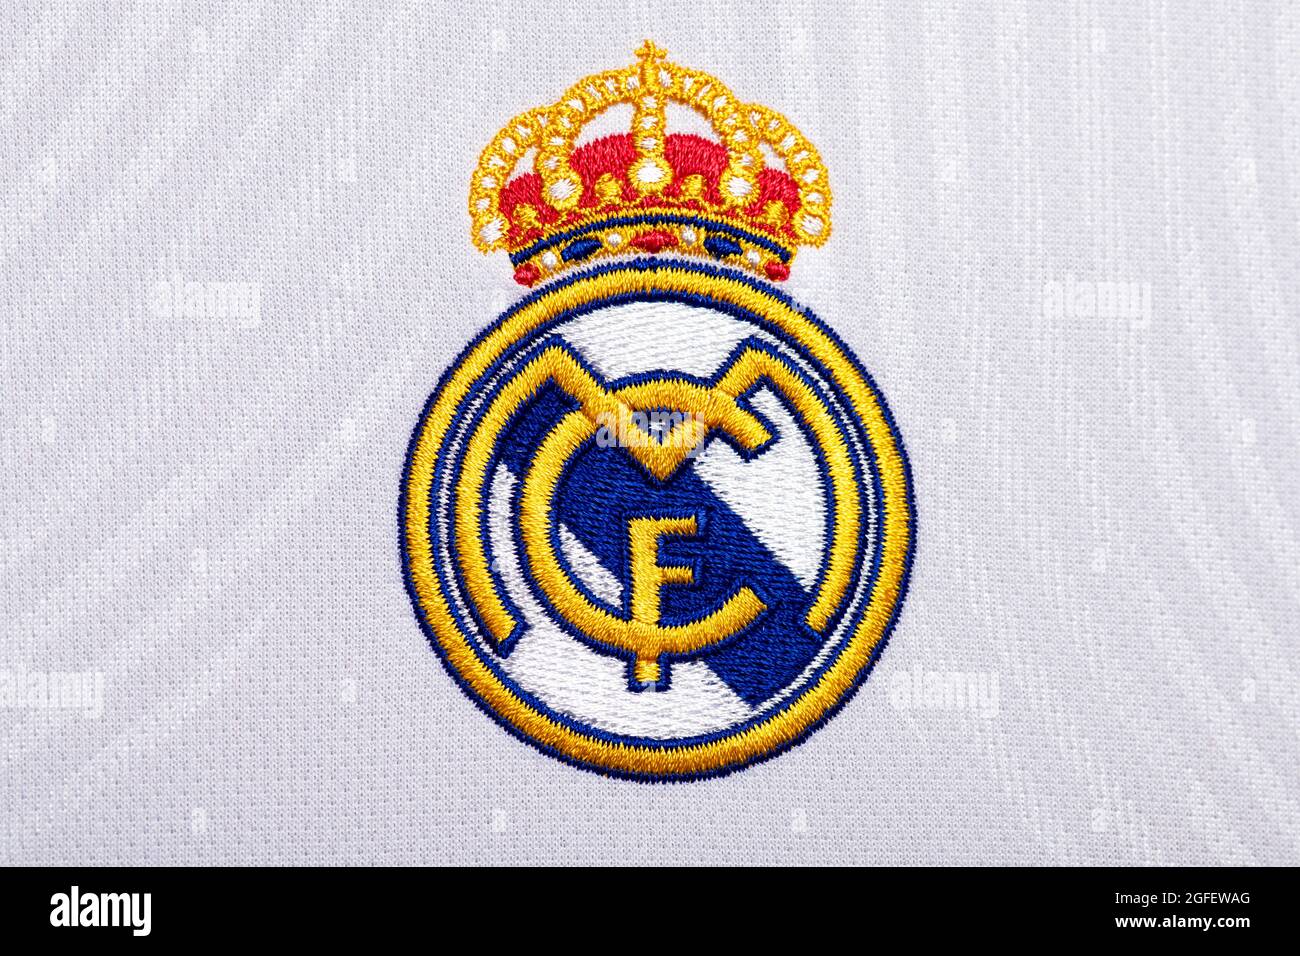 Real madrid club de futbol hi-res stock photography and images - Alamy